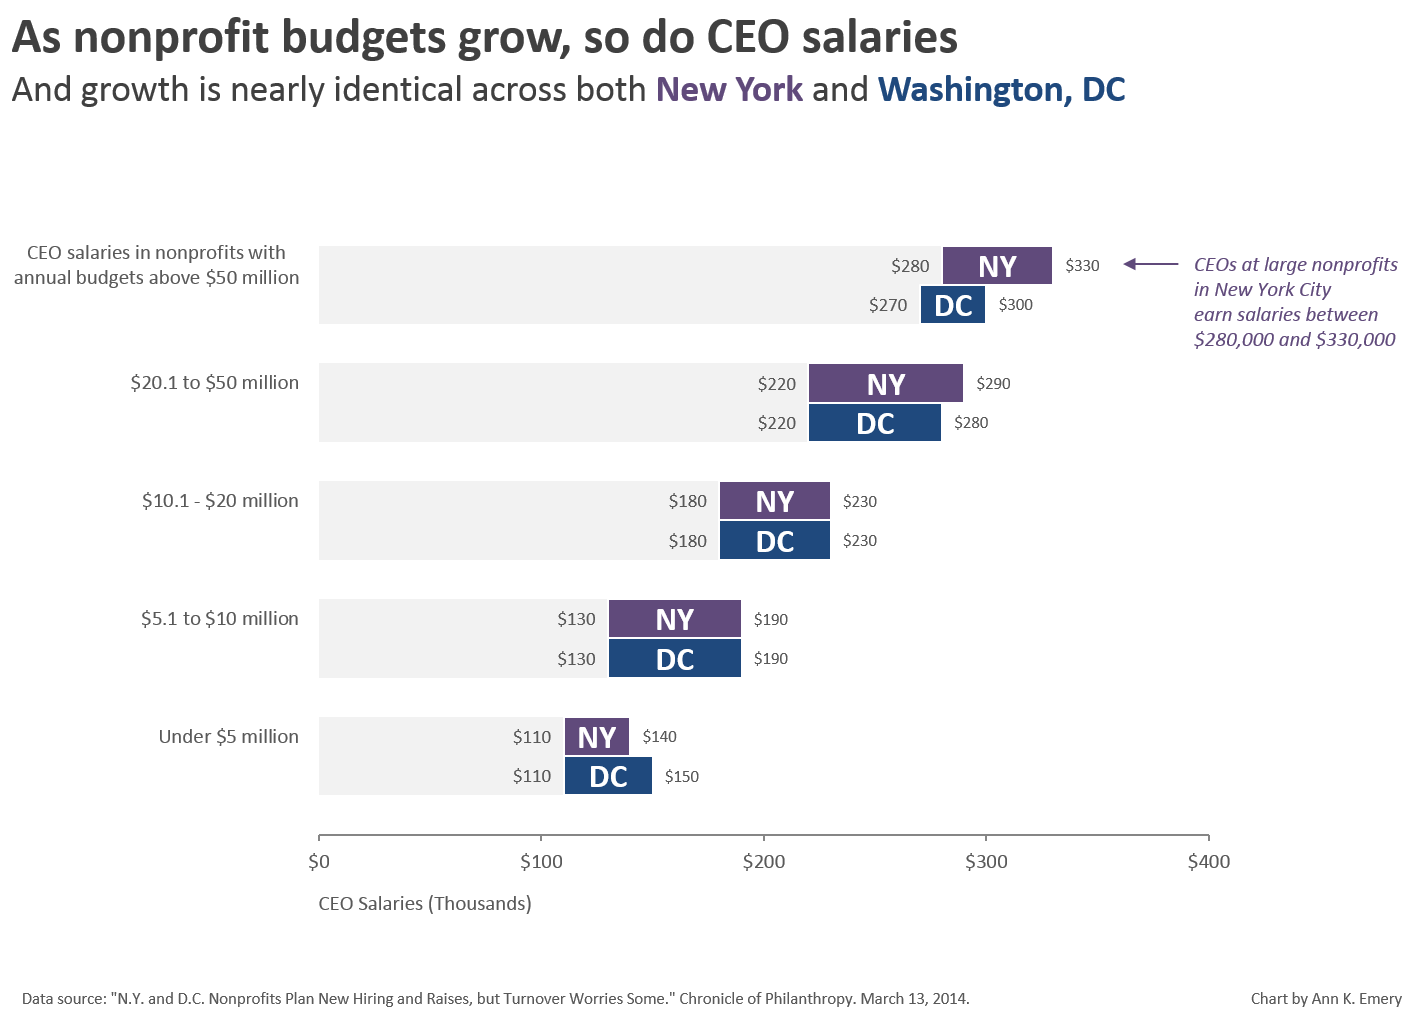 Chart created through Microsoft Excel that shows that as nonprofit budgets grow, so do CEO salaries.